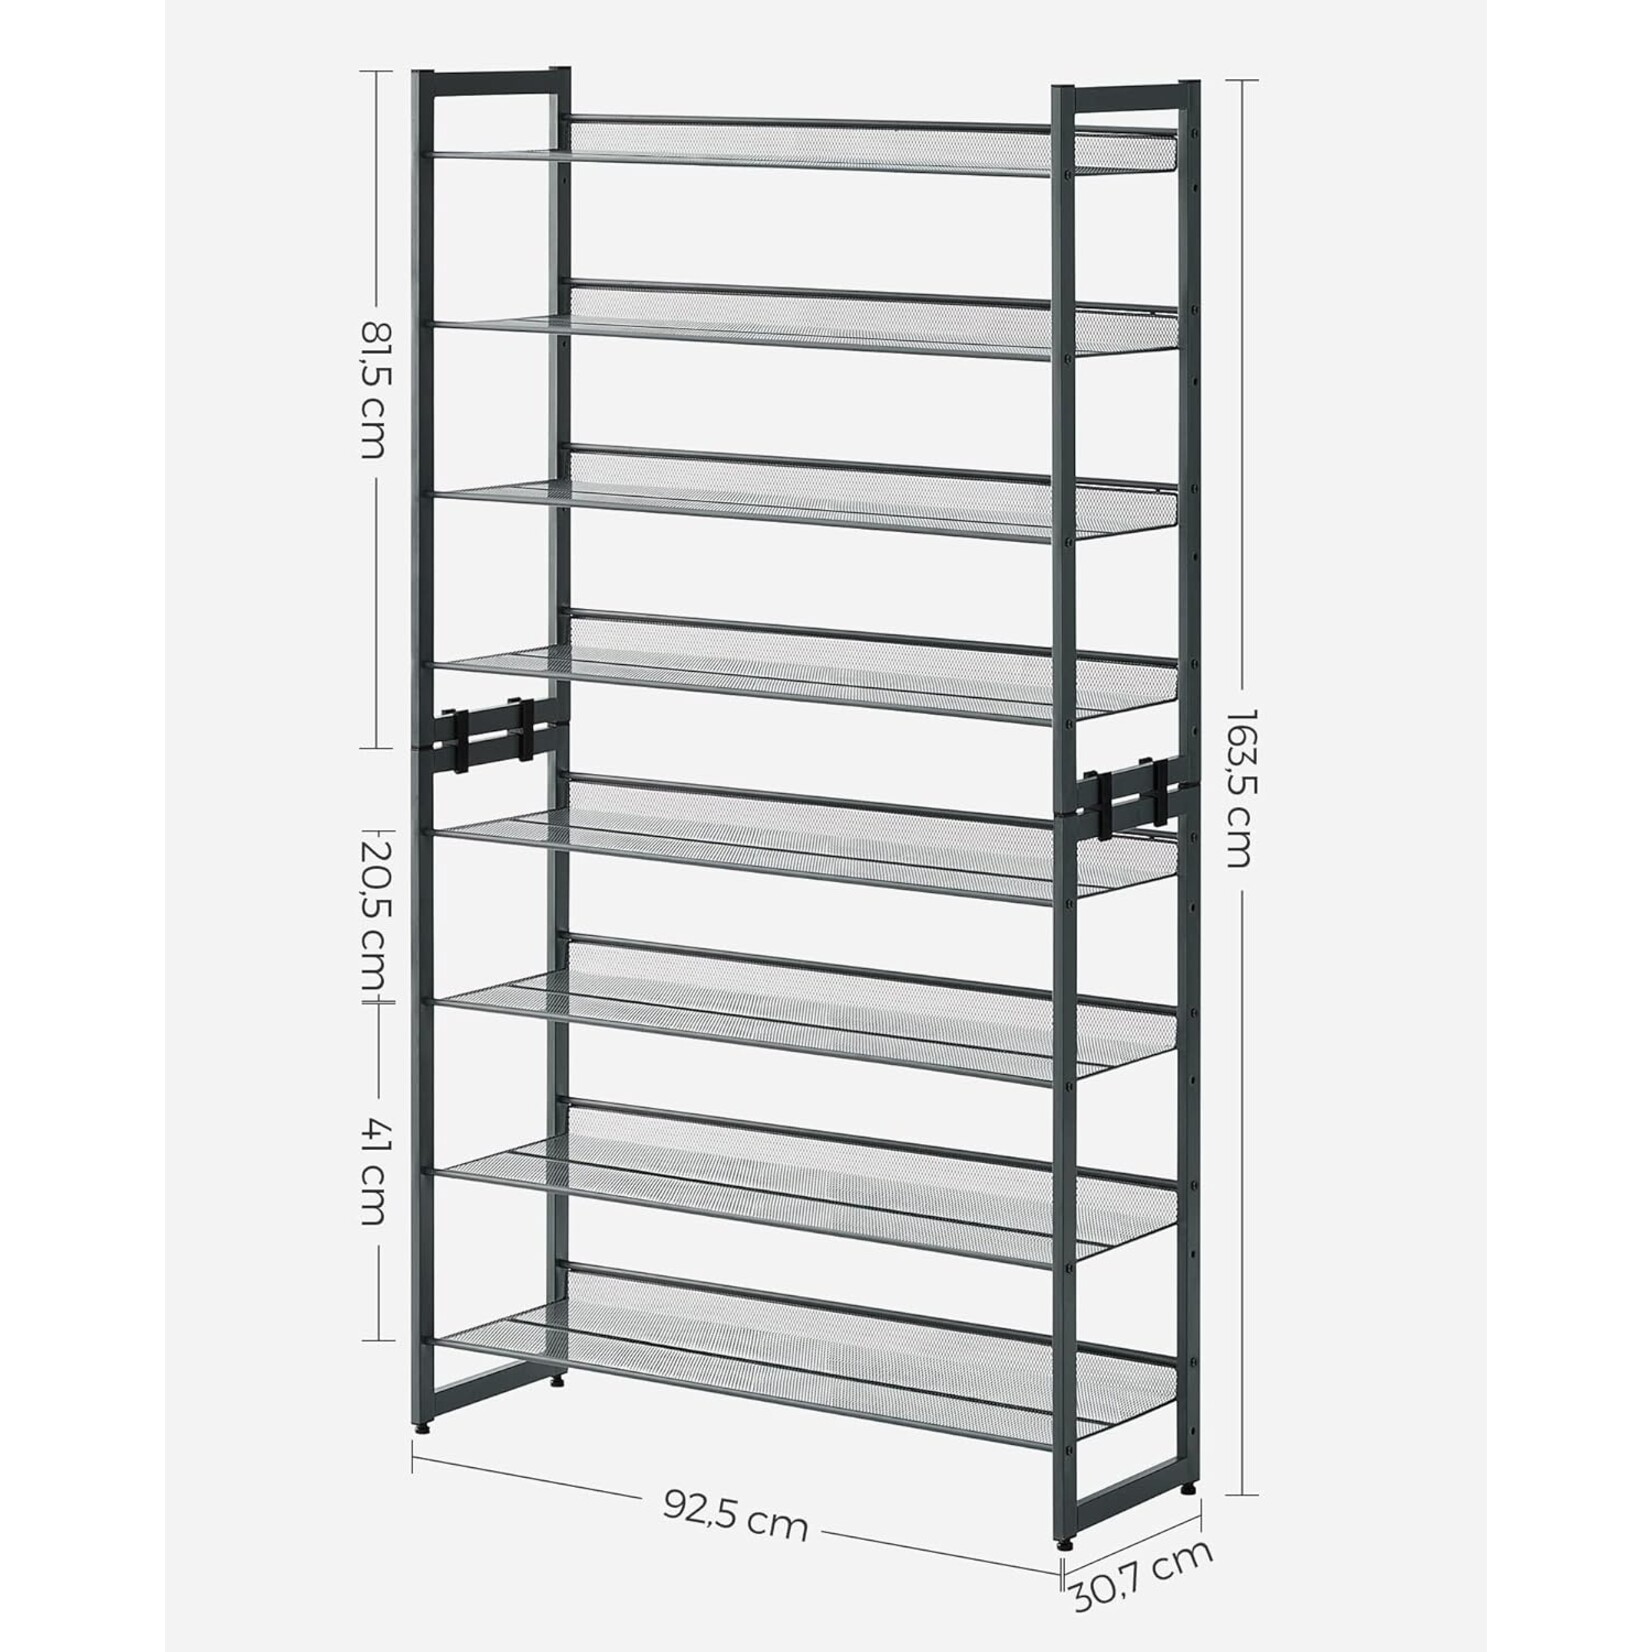 Bobbel Home Dok Home - Shoe rack - With 8 shelves - For 32 to 40 pairs of shoes - Gray